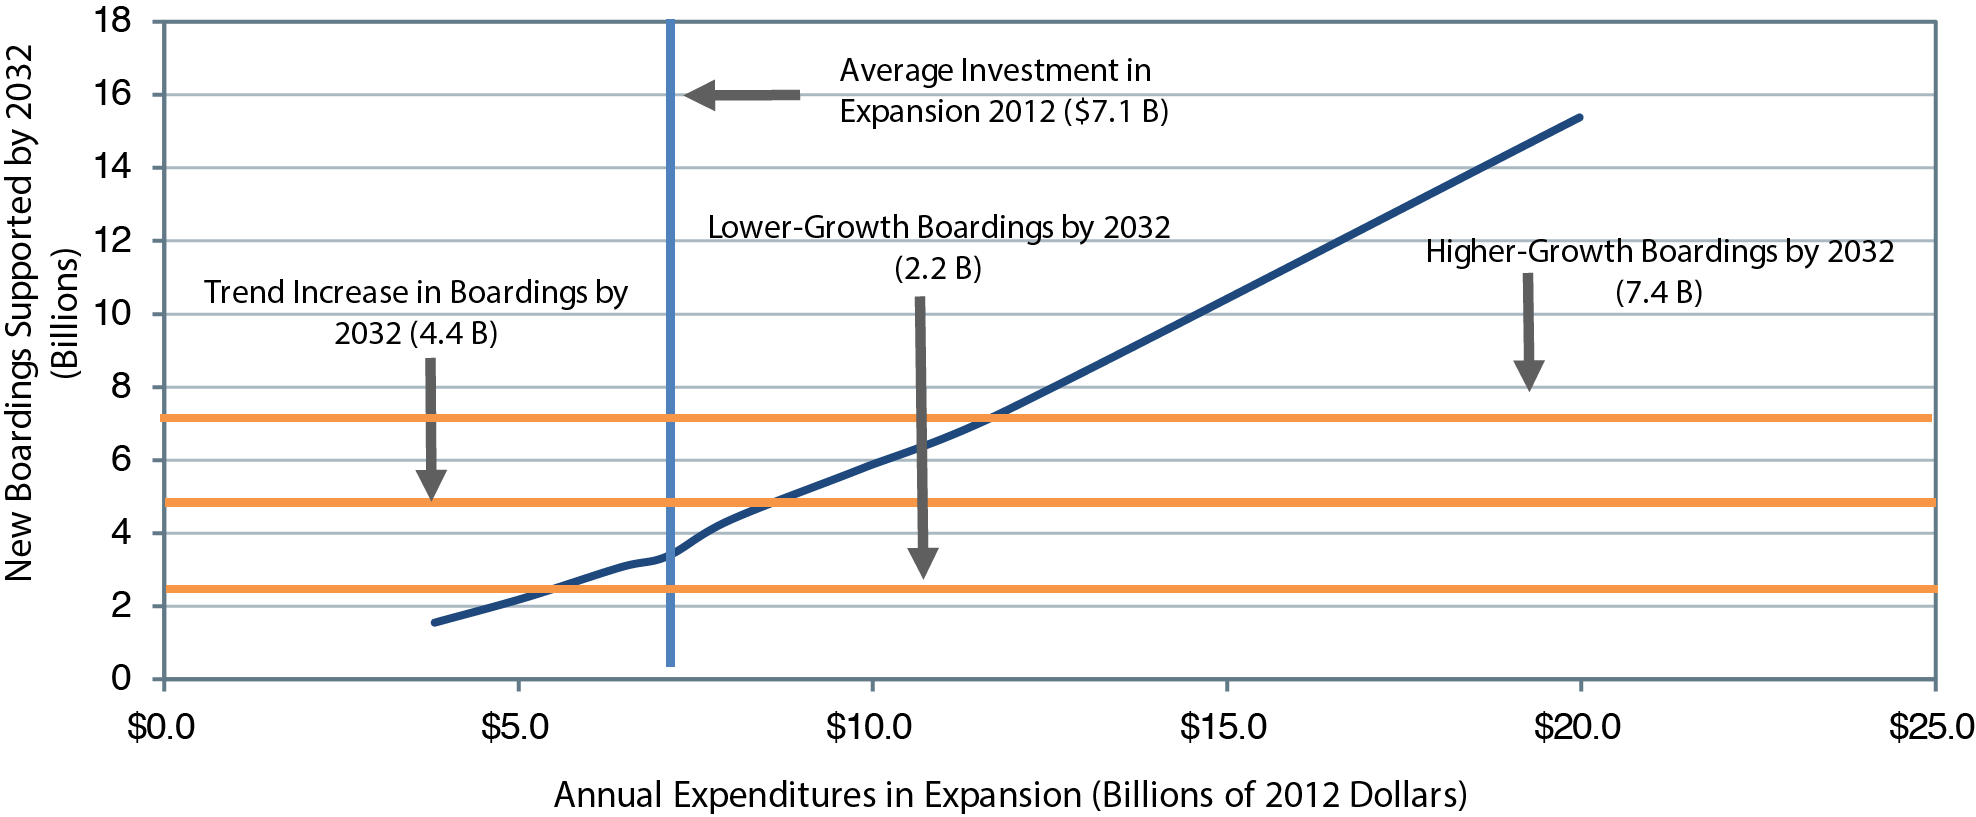 A line chart plots new boardings supported by the year 2032 over annual expenditures in expansion. The plot has an initial value of 1.6 billion new riders supported annually at an annual expenditure of $3.8 billion, and trends upward to a value of 15.4 billion new riders supported annually at an annual expenditure of $20 billion. The plot intersects with the 15-year historic growth rate trend increase of 4.4 billion in boardings by 2032 at an annual expenditure of $8 billion. The current average investment in expansion is $7.1 billion. Source: Transit Economic Requirements Model. 